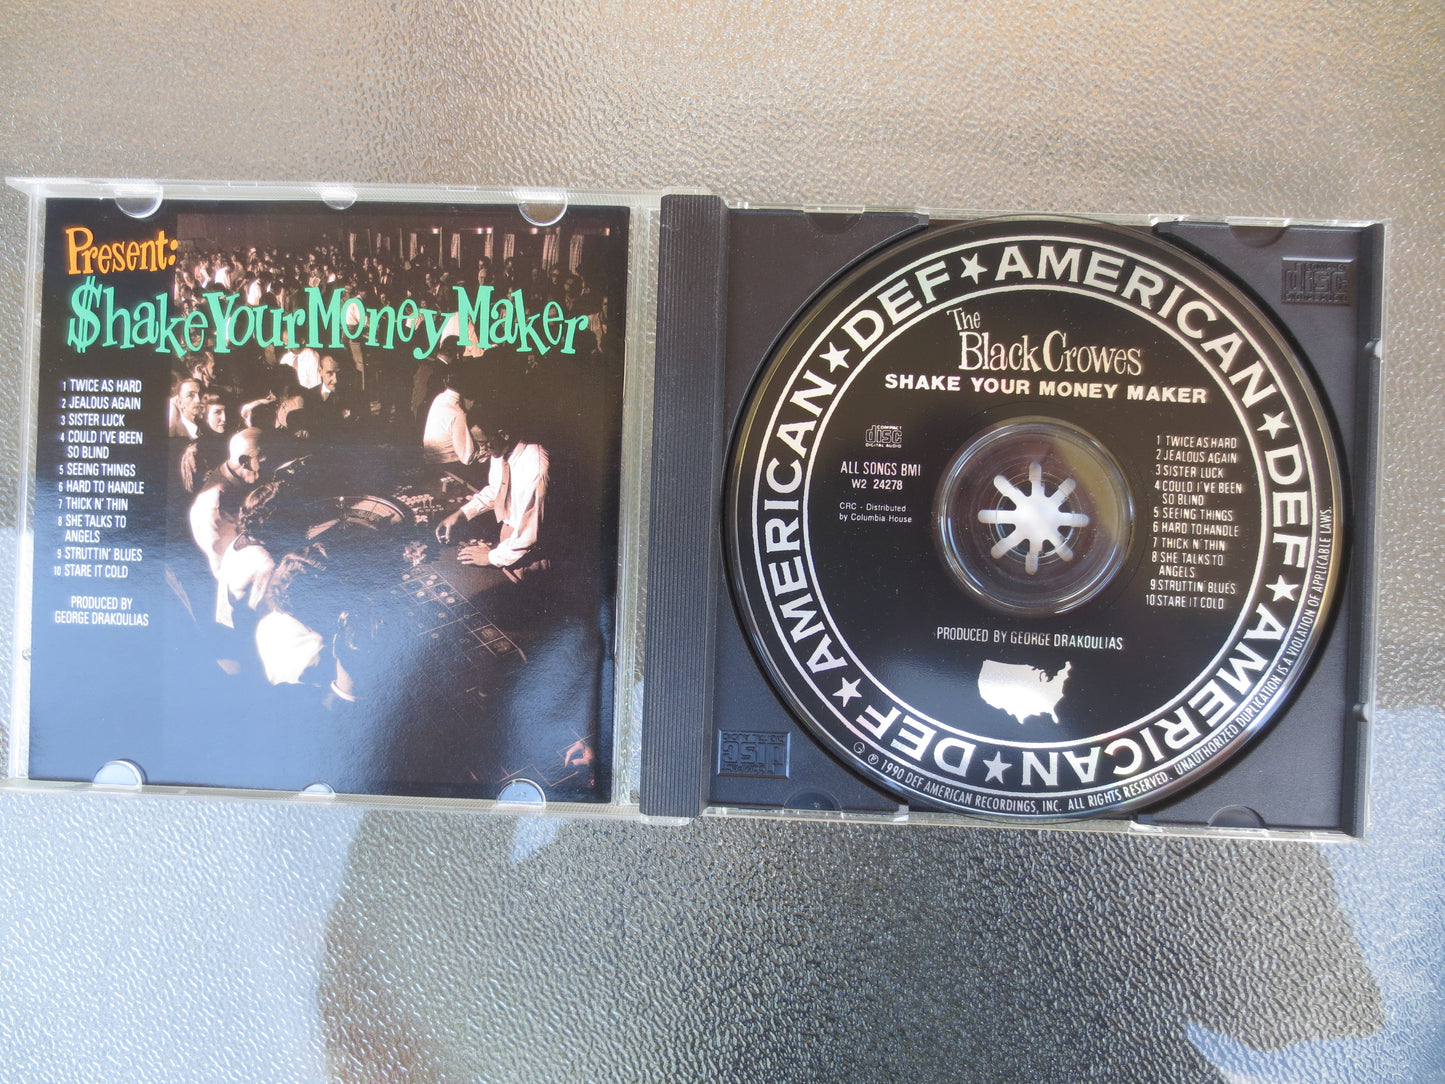 The BLACK CROWES, Shake Your MONEY, Black Crowes Cd, Black Crowes Lp, Rock Cd, Classic Rock Cd, Music Cd, 1990 Compact Disc